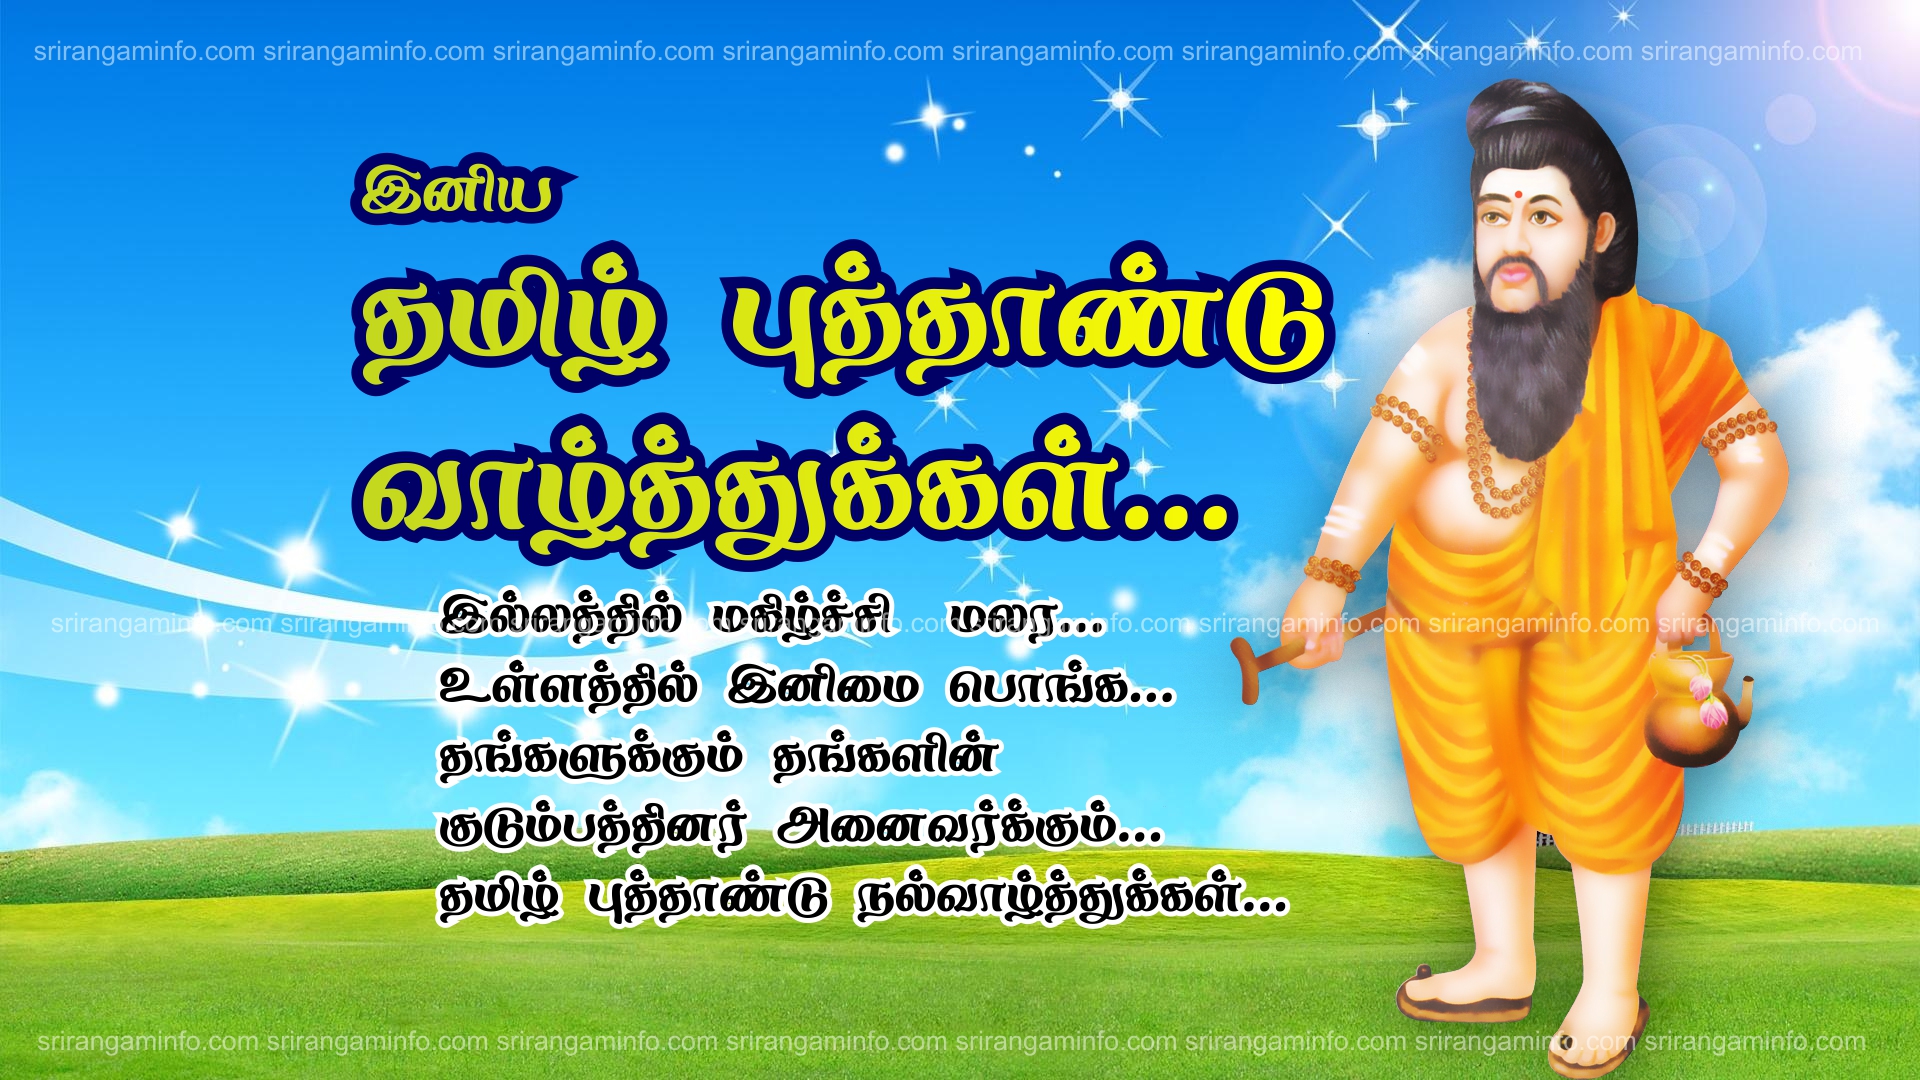 Tamil New Year Greetings - Fantasy Landscape , HD Wallpaper & Backgrounds